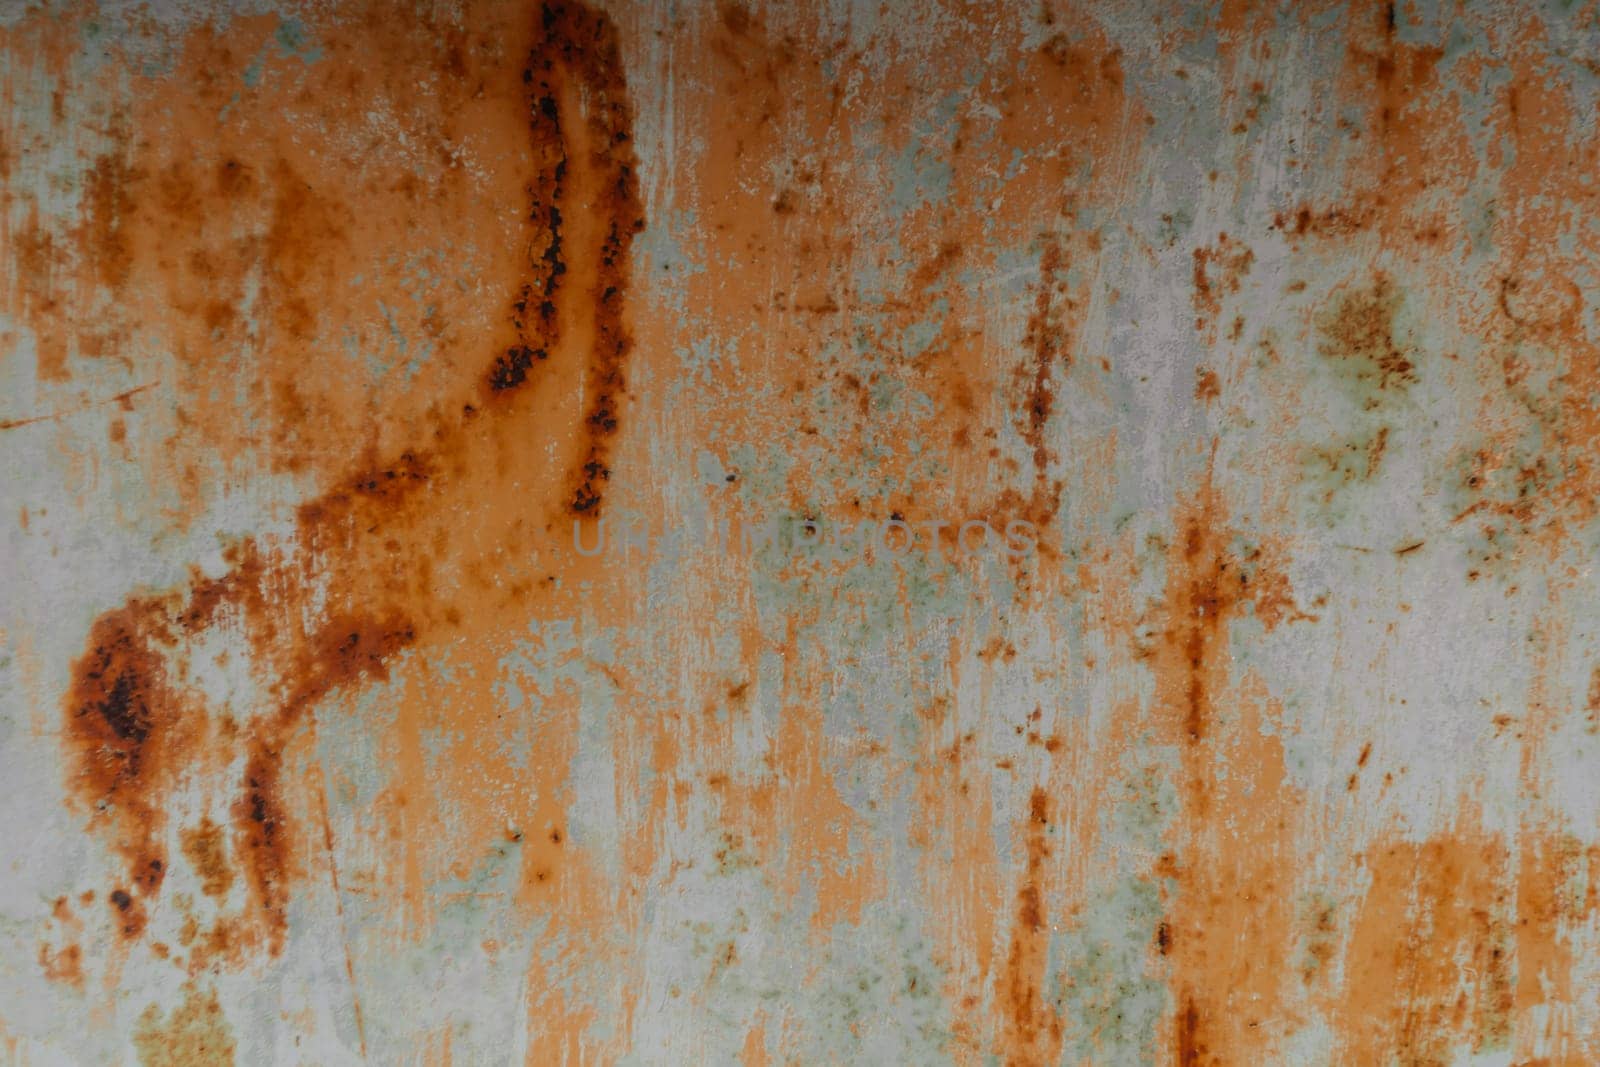 The image is of a rusty metal surface with a greenish tint. The surface is covered in rust and has a worn, aged appearance. The combination of the rust and greenish tint creates a sense of decay